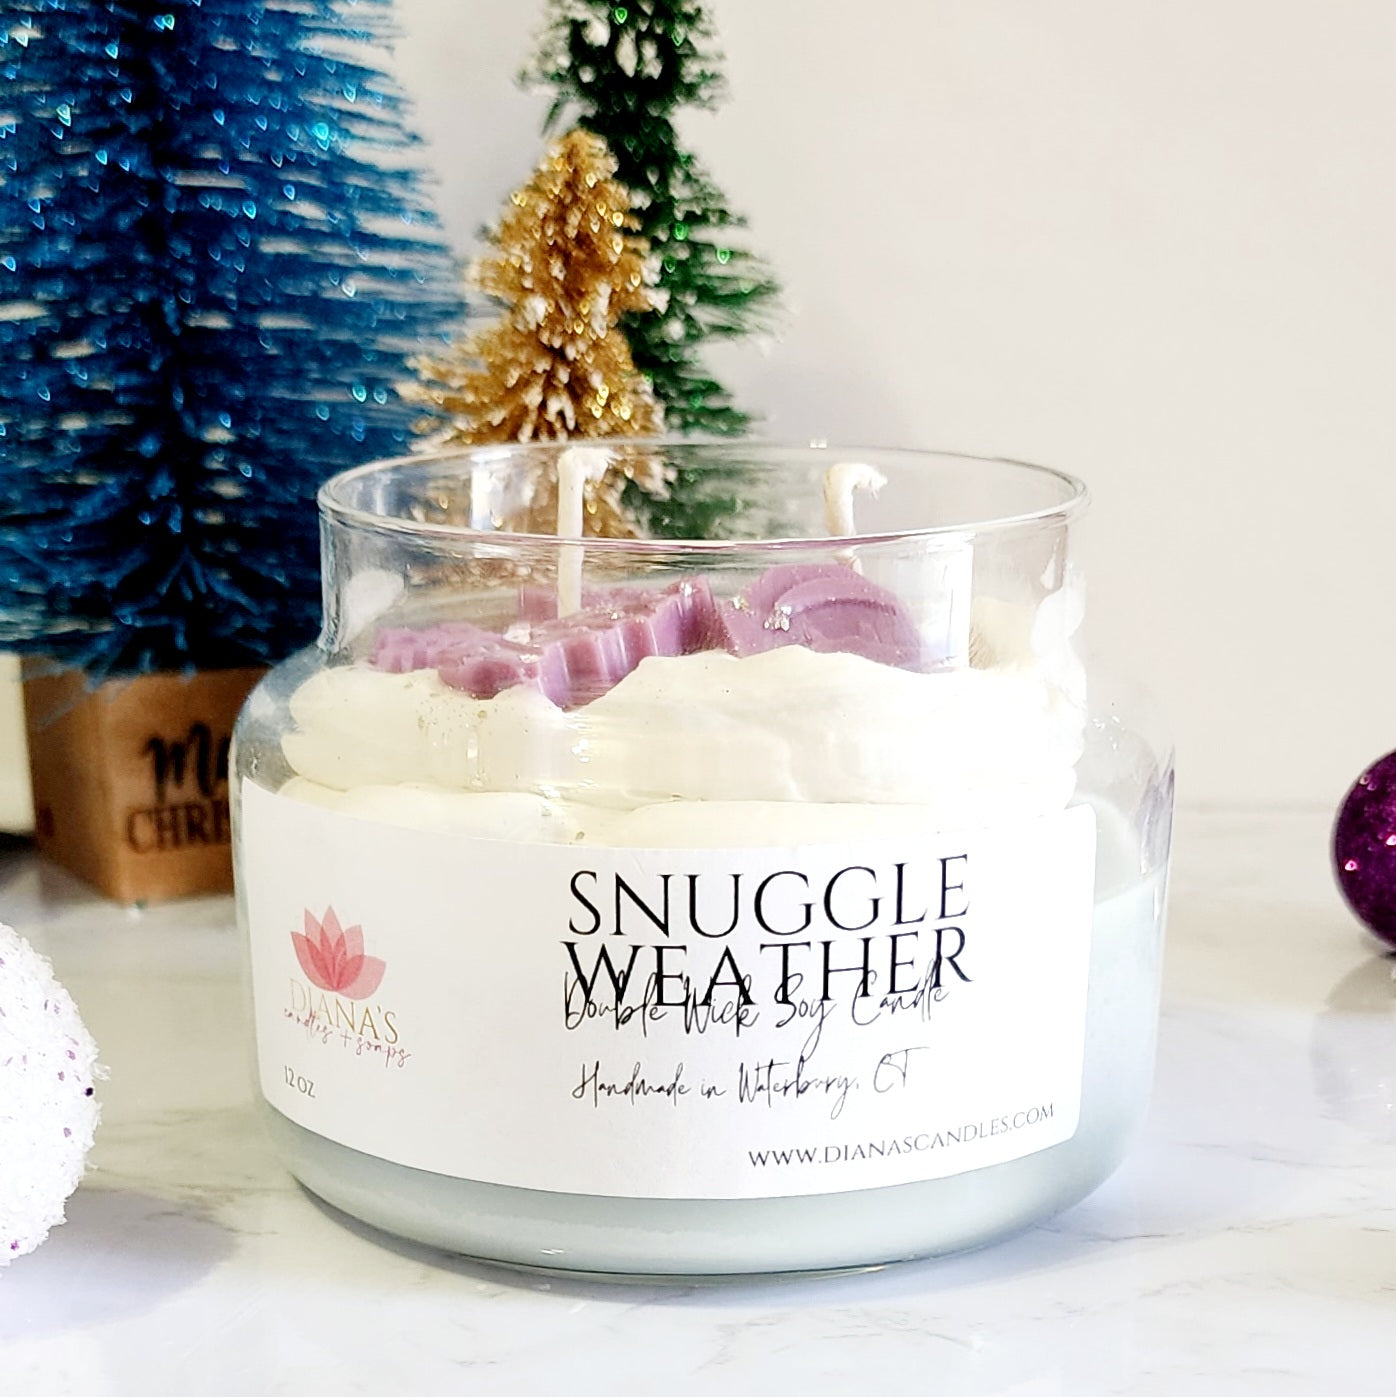 Snuggle Weather Double Wick Candle Diana's Candles and Soaps 